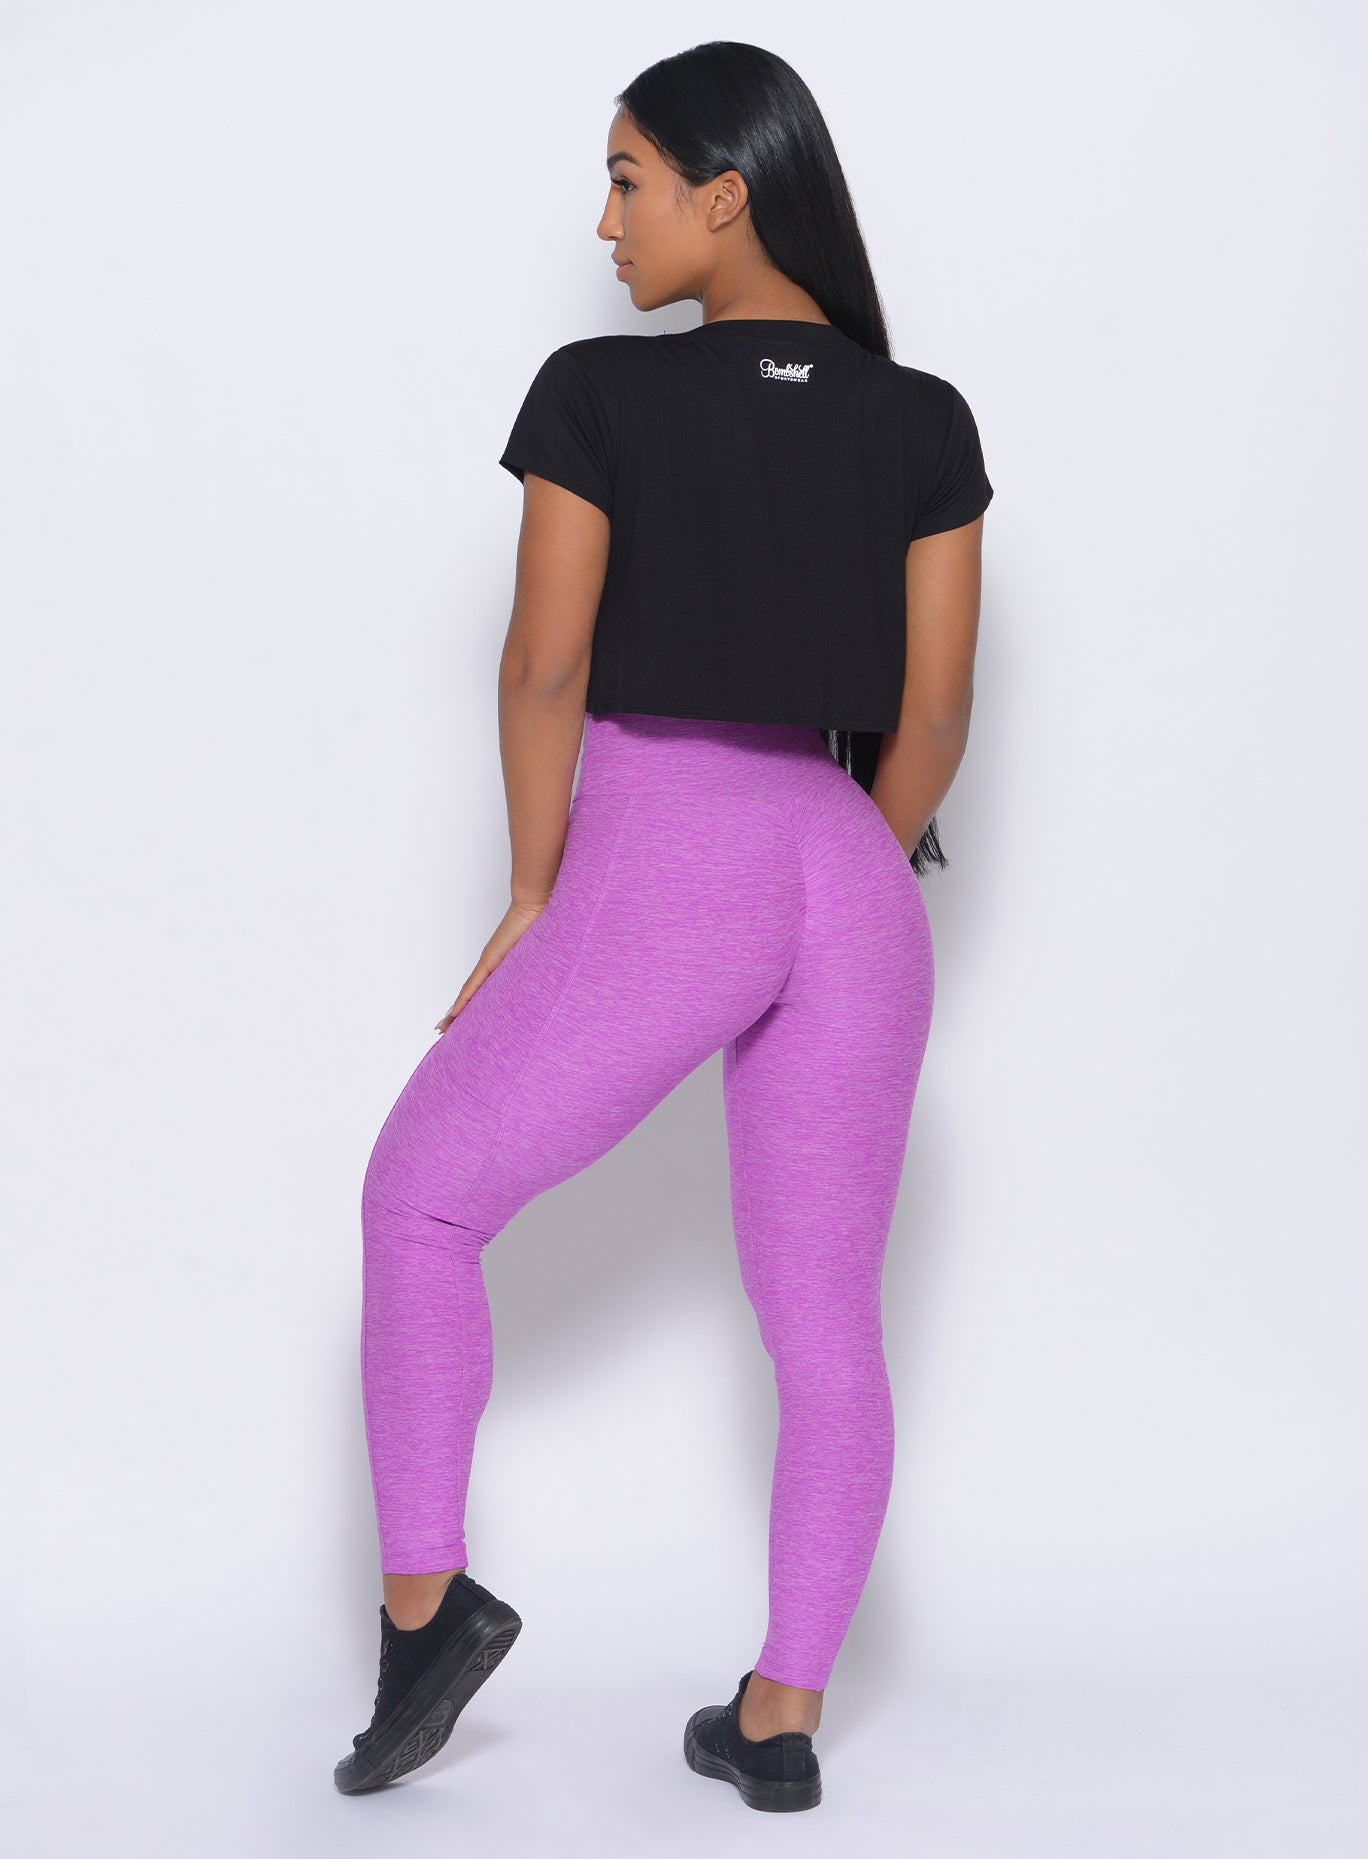 Back view of the model wearing our thrive leggings in purple color and a black top 